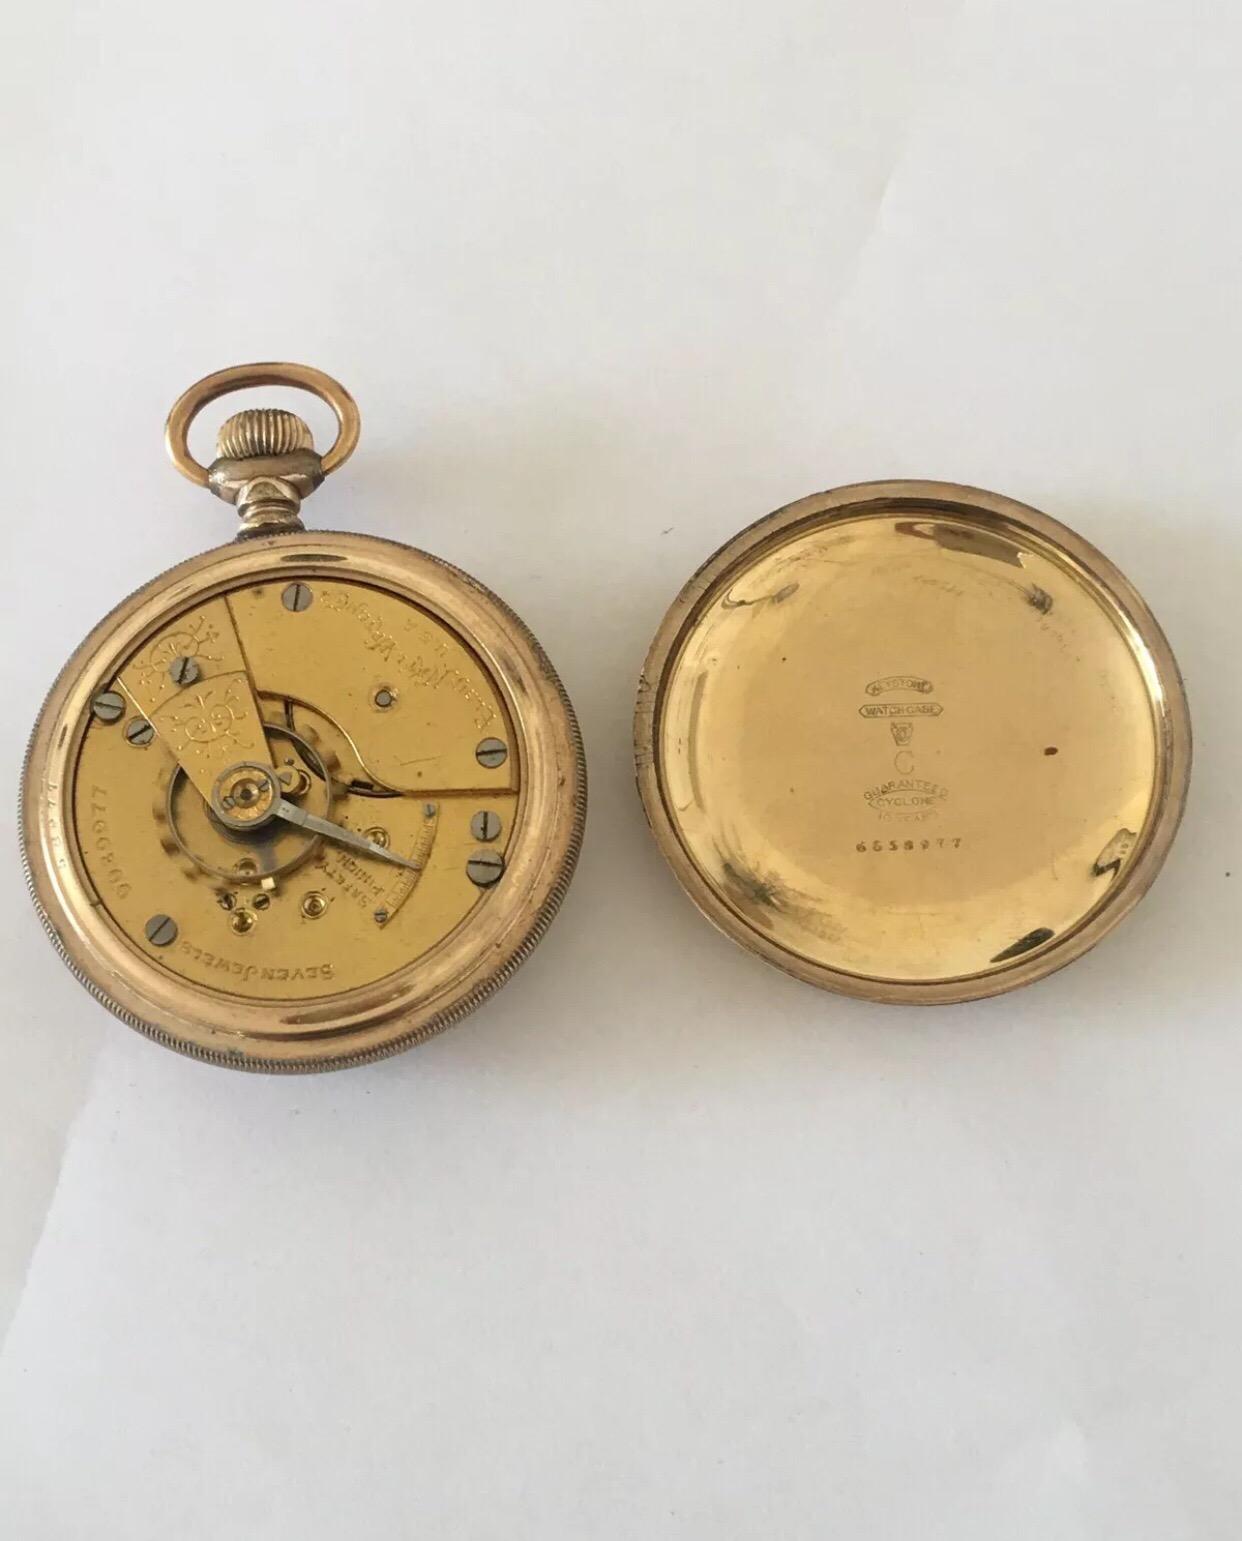 
Antique ScrewbackGold Plated Pocket Watch Signed Elgin Nat’l Watch Co. U. S. A.



This beautiful 55mm diameter keyless hand winding gold plated pocket watch is in good working condition and it is ticking well. Visible signs of ageing and wear with